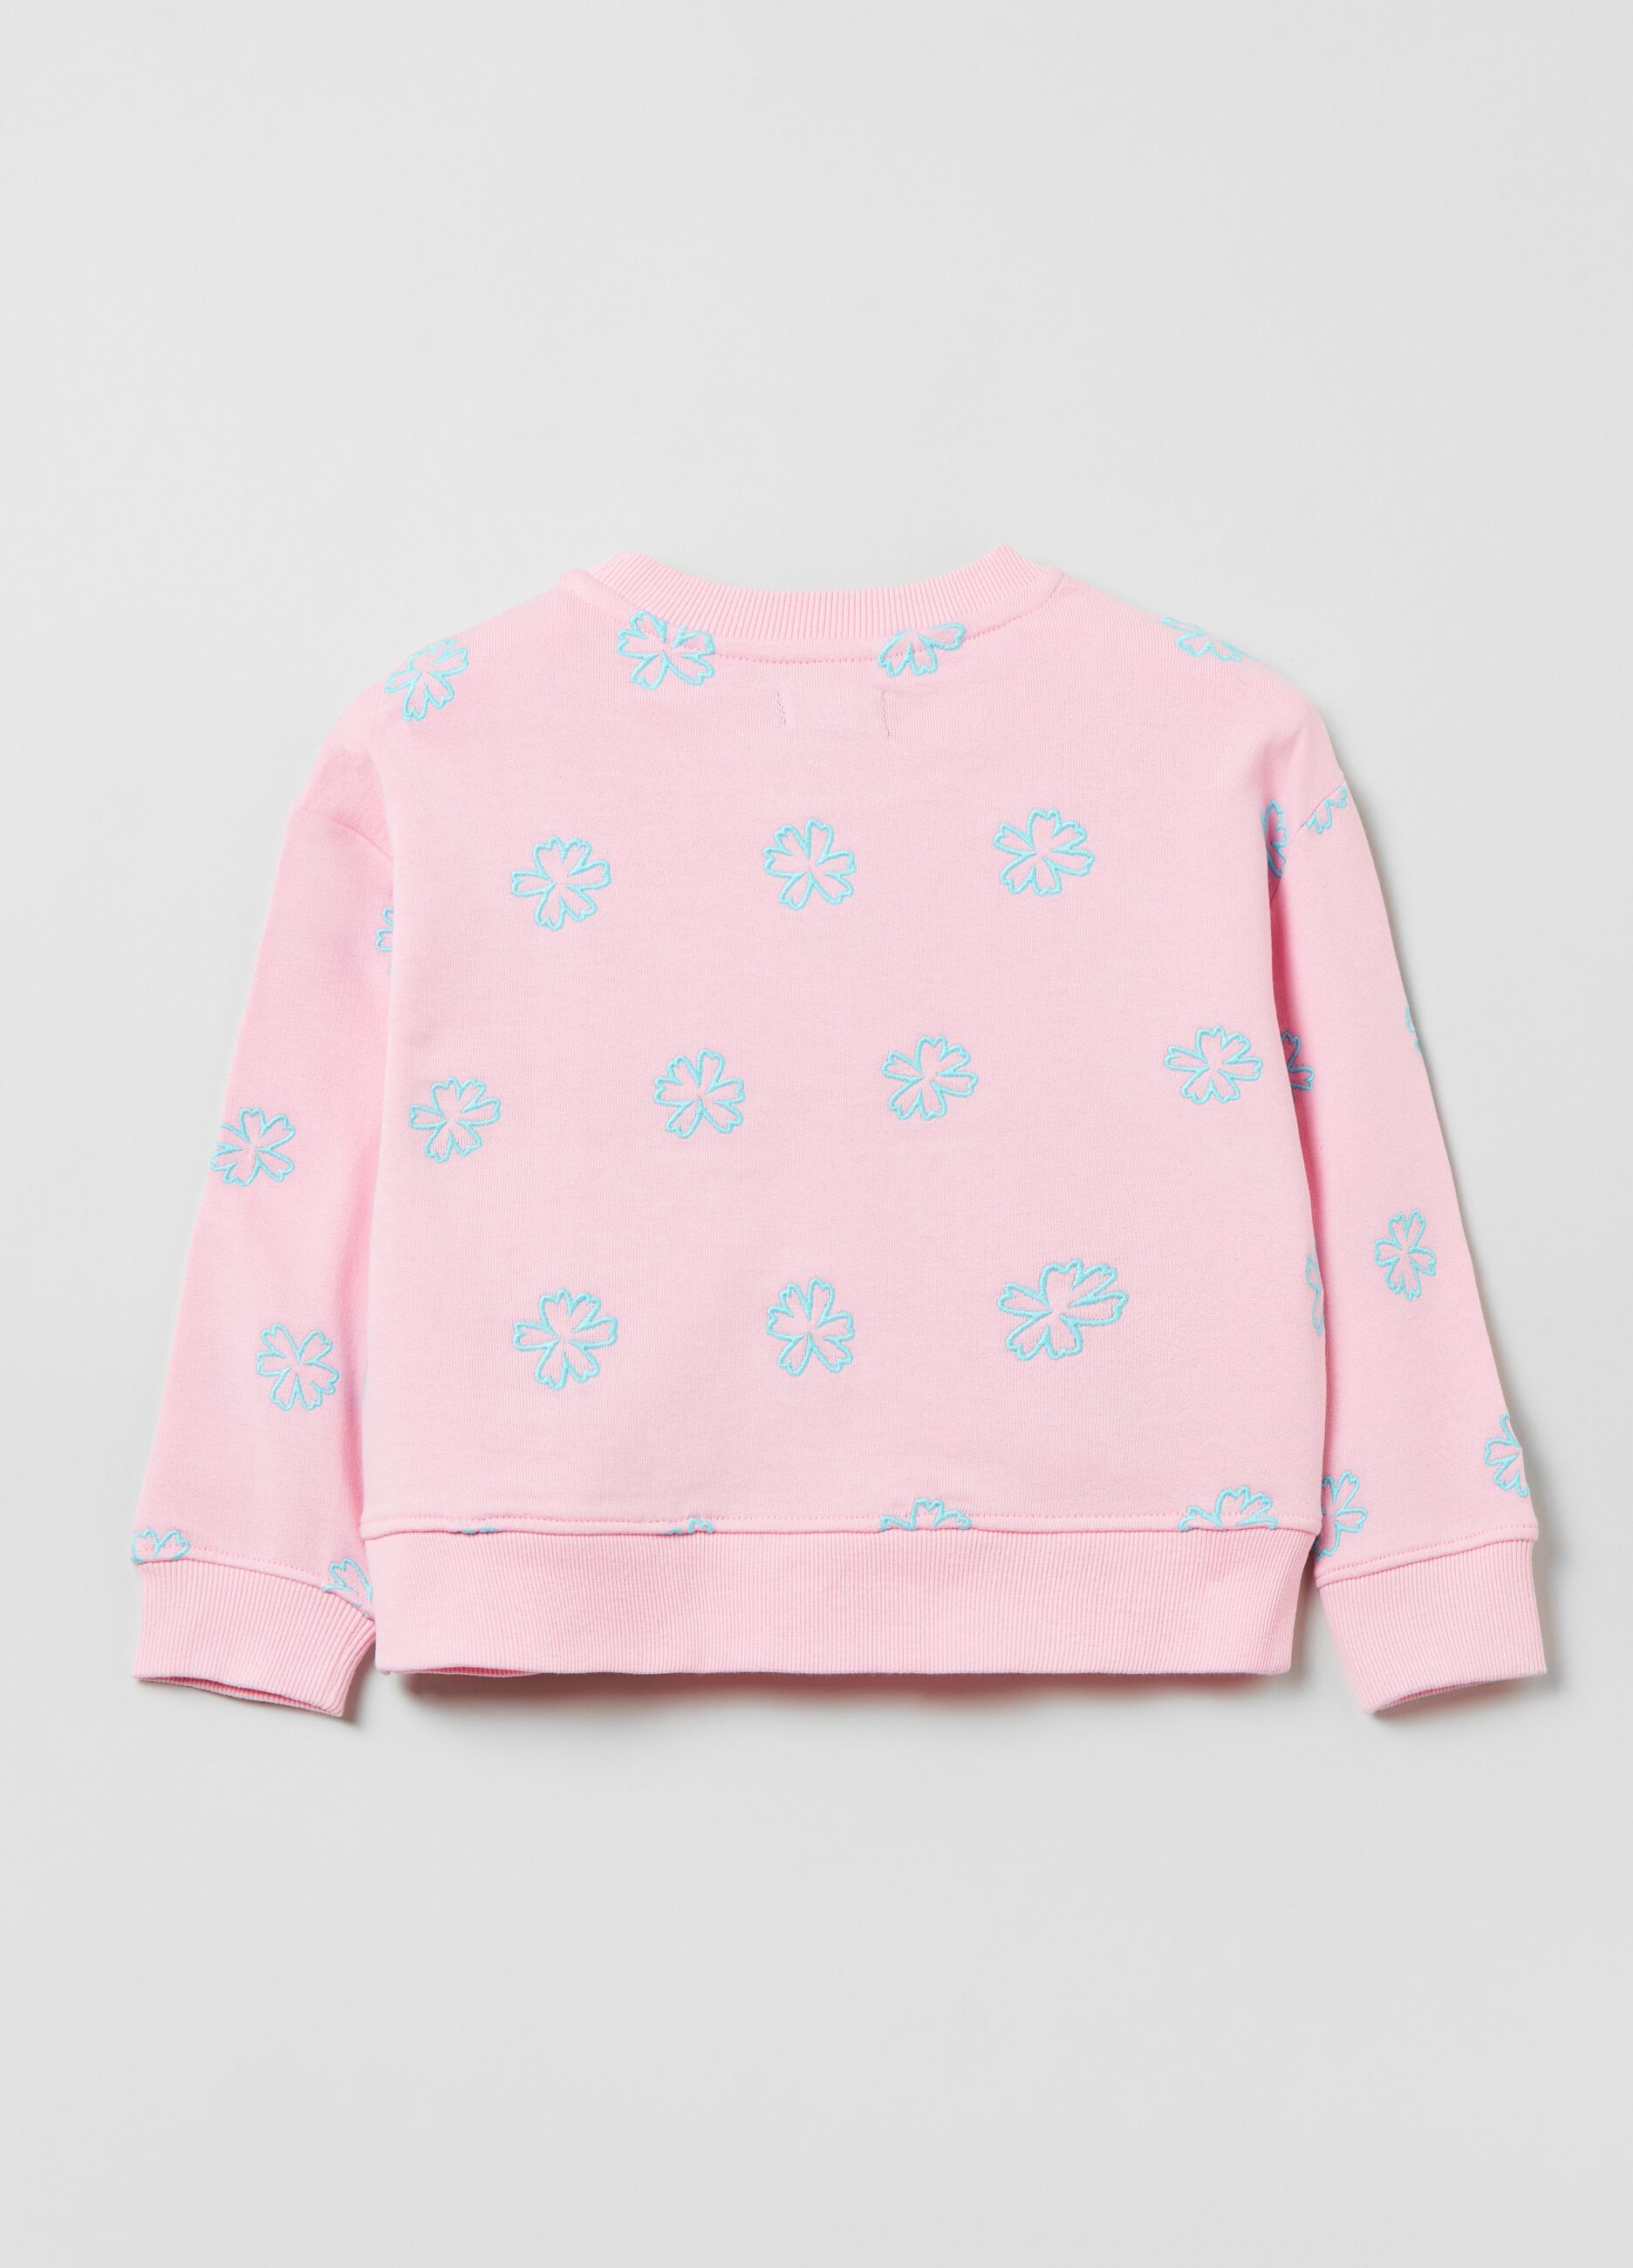 Cotton sweatshirt with small flowers embroidery